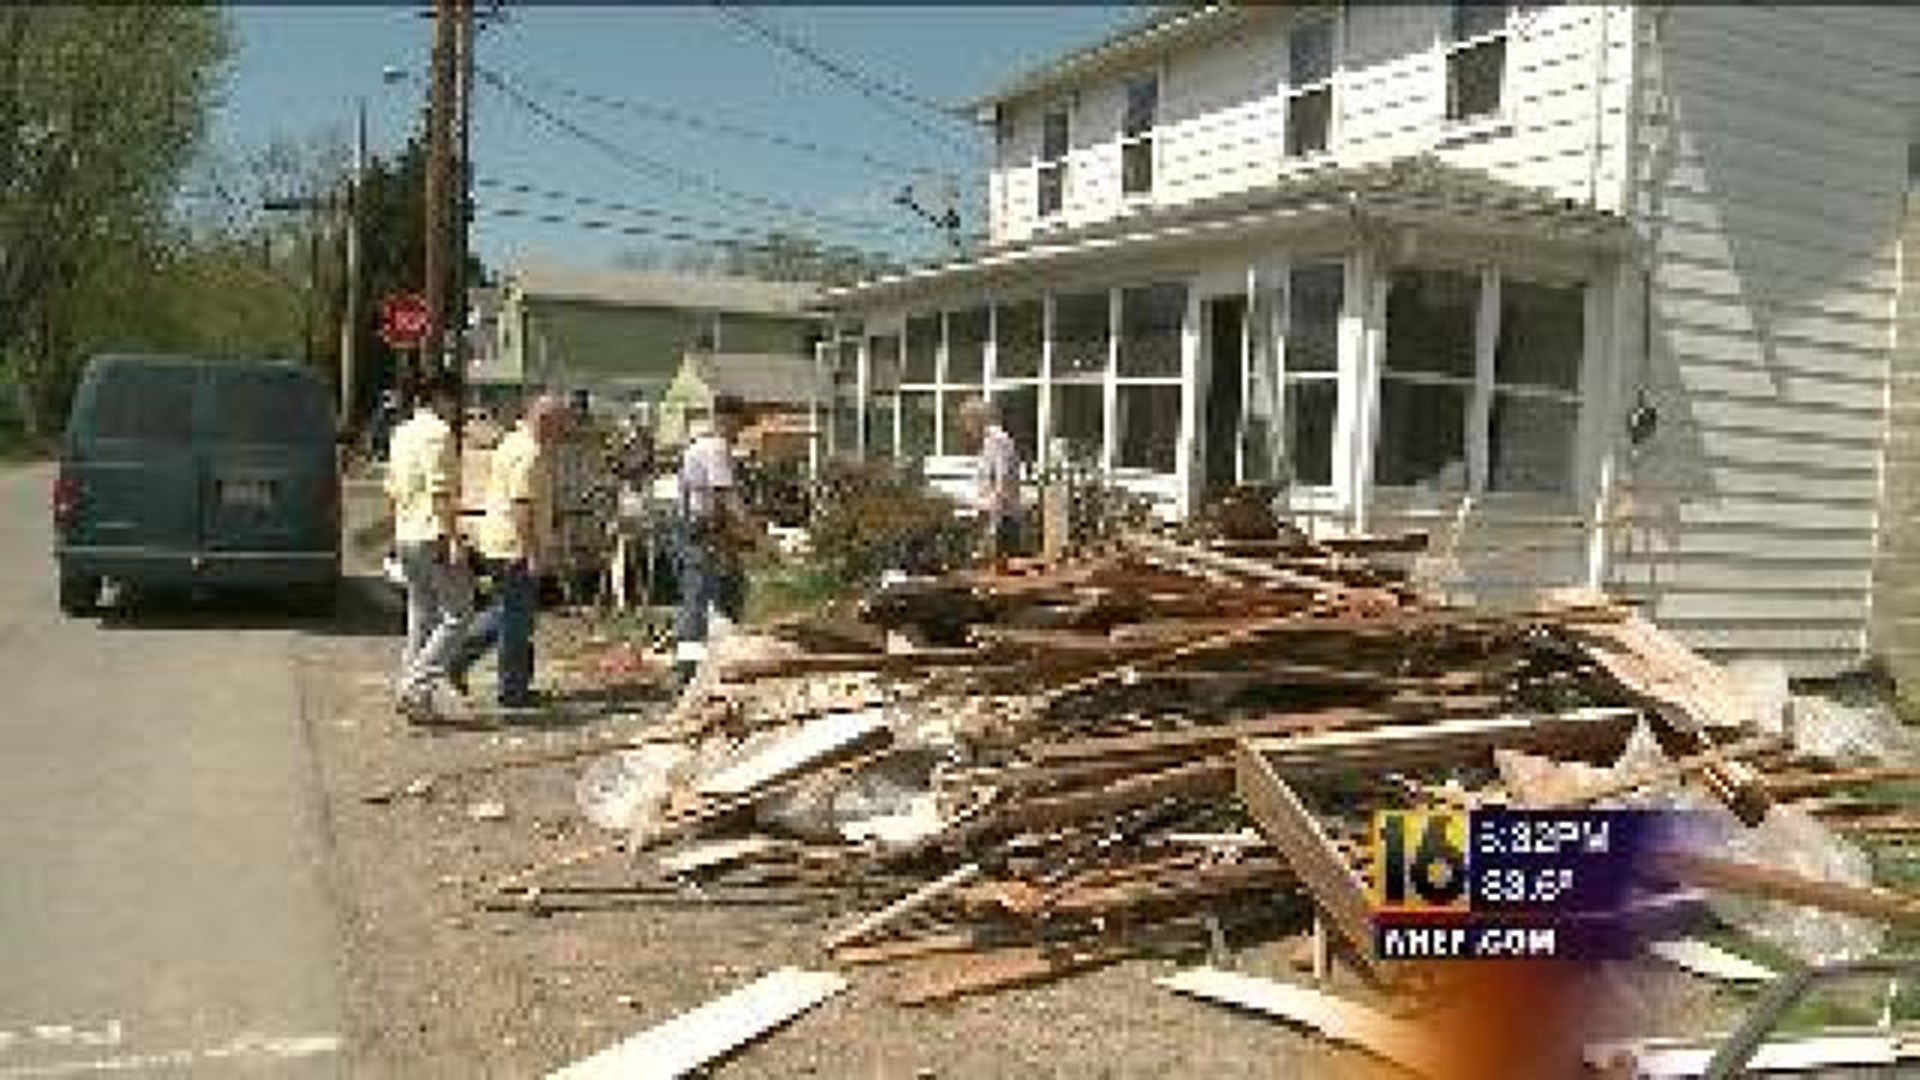 Flood Cleanup Continues in Luzerne County